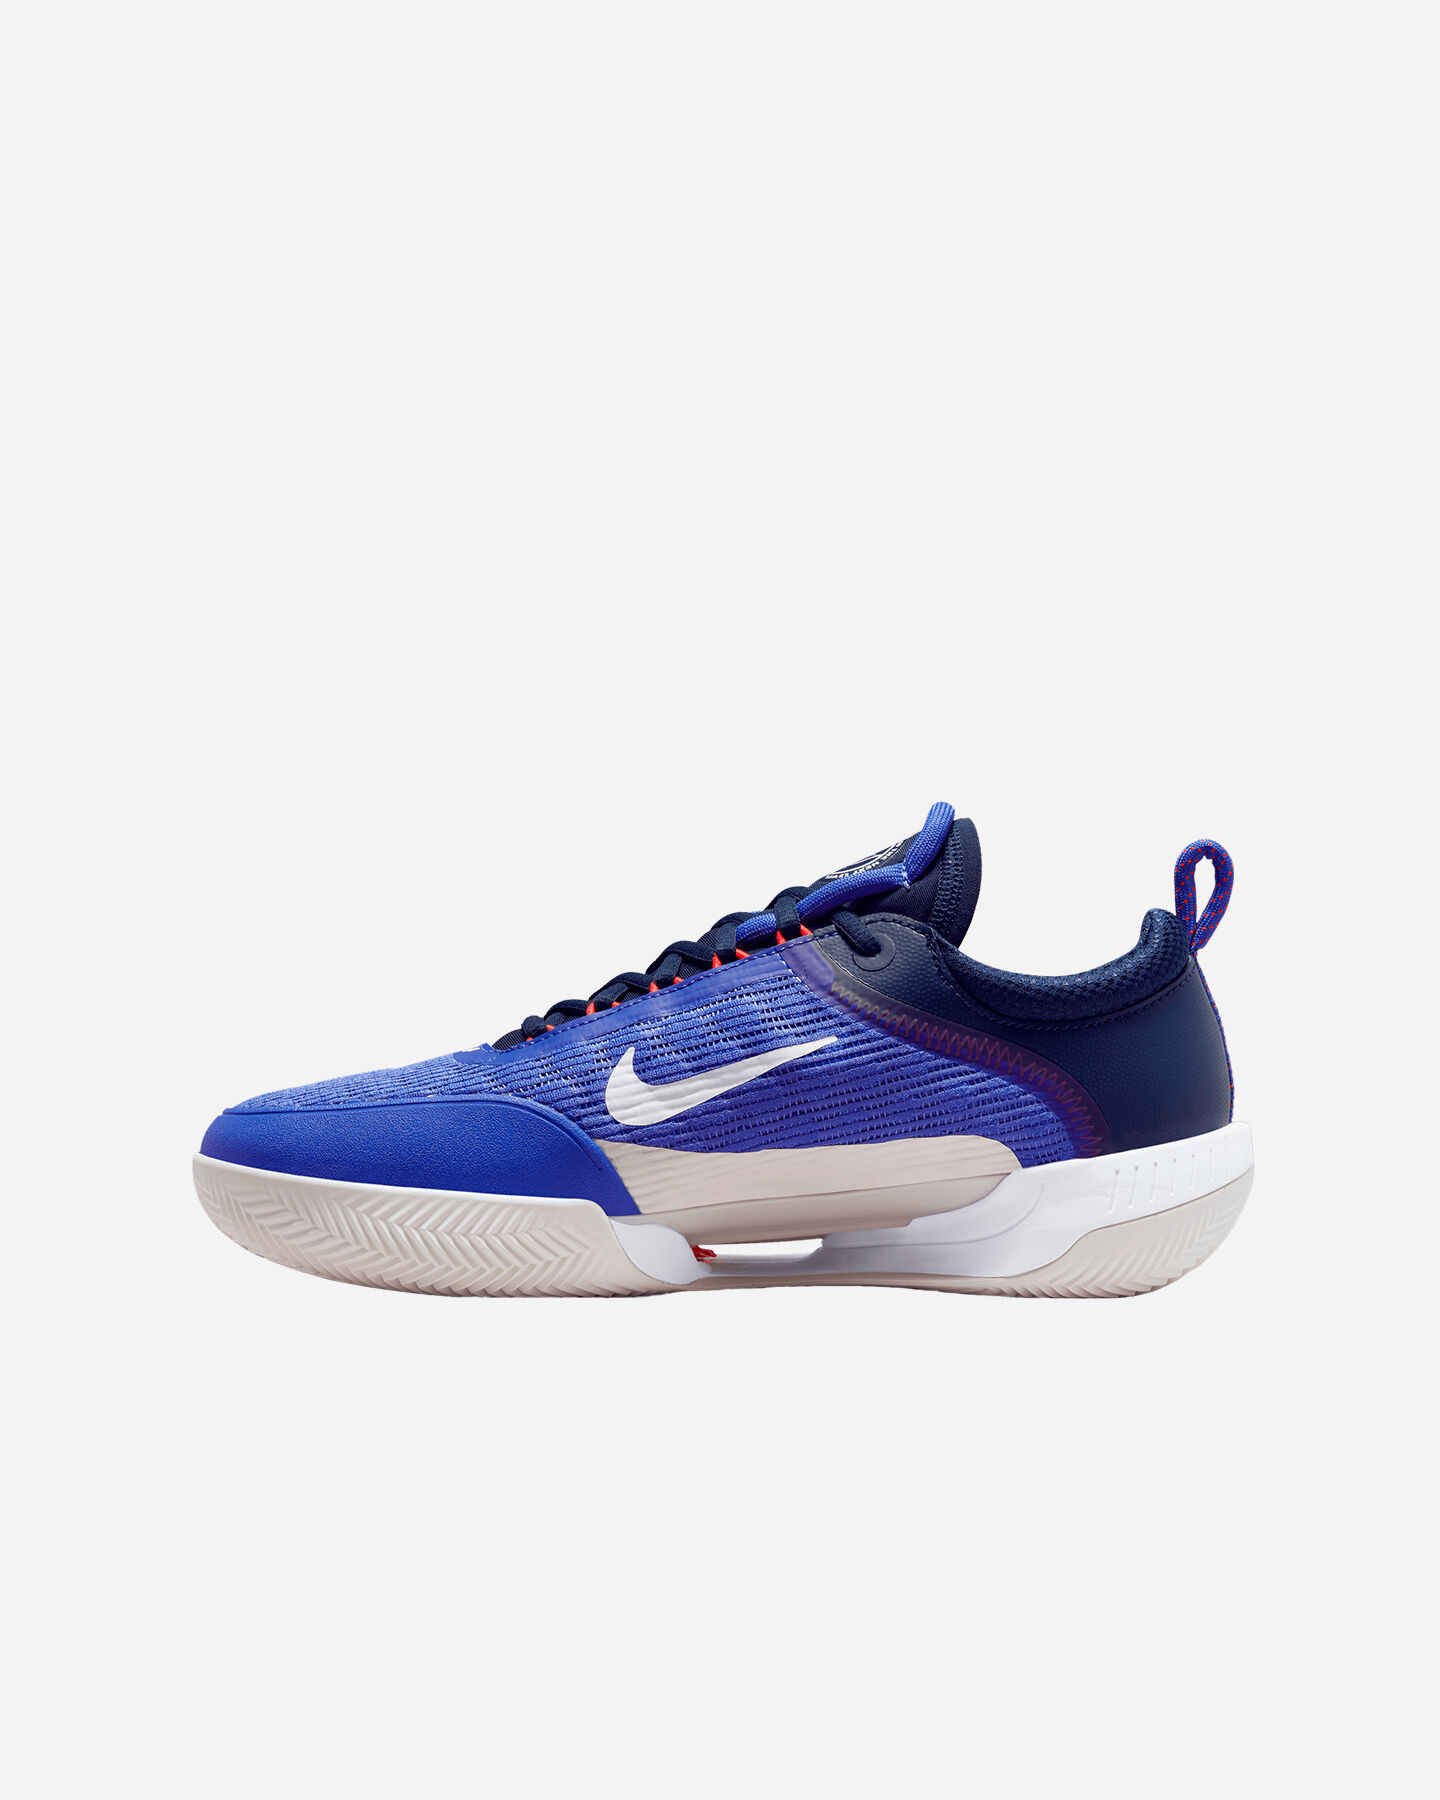  Scarpe tennis NIKE COURT ZOOM NXT CLAY M S5455415 scatto 2